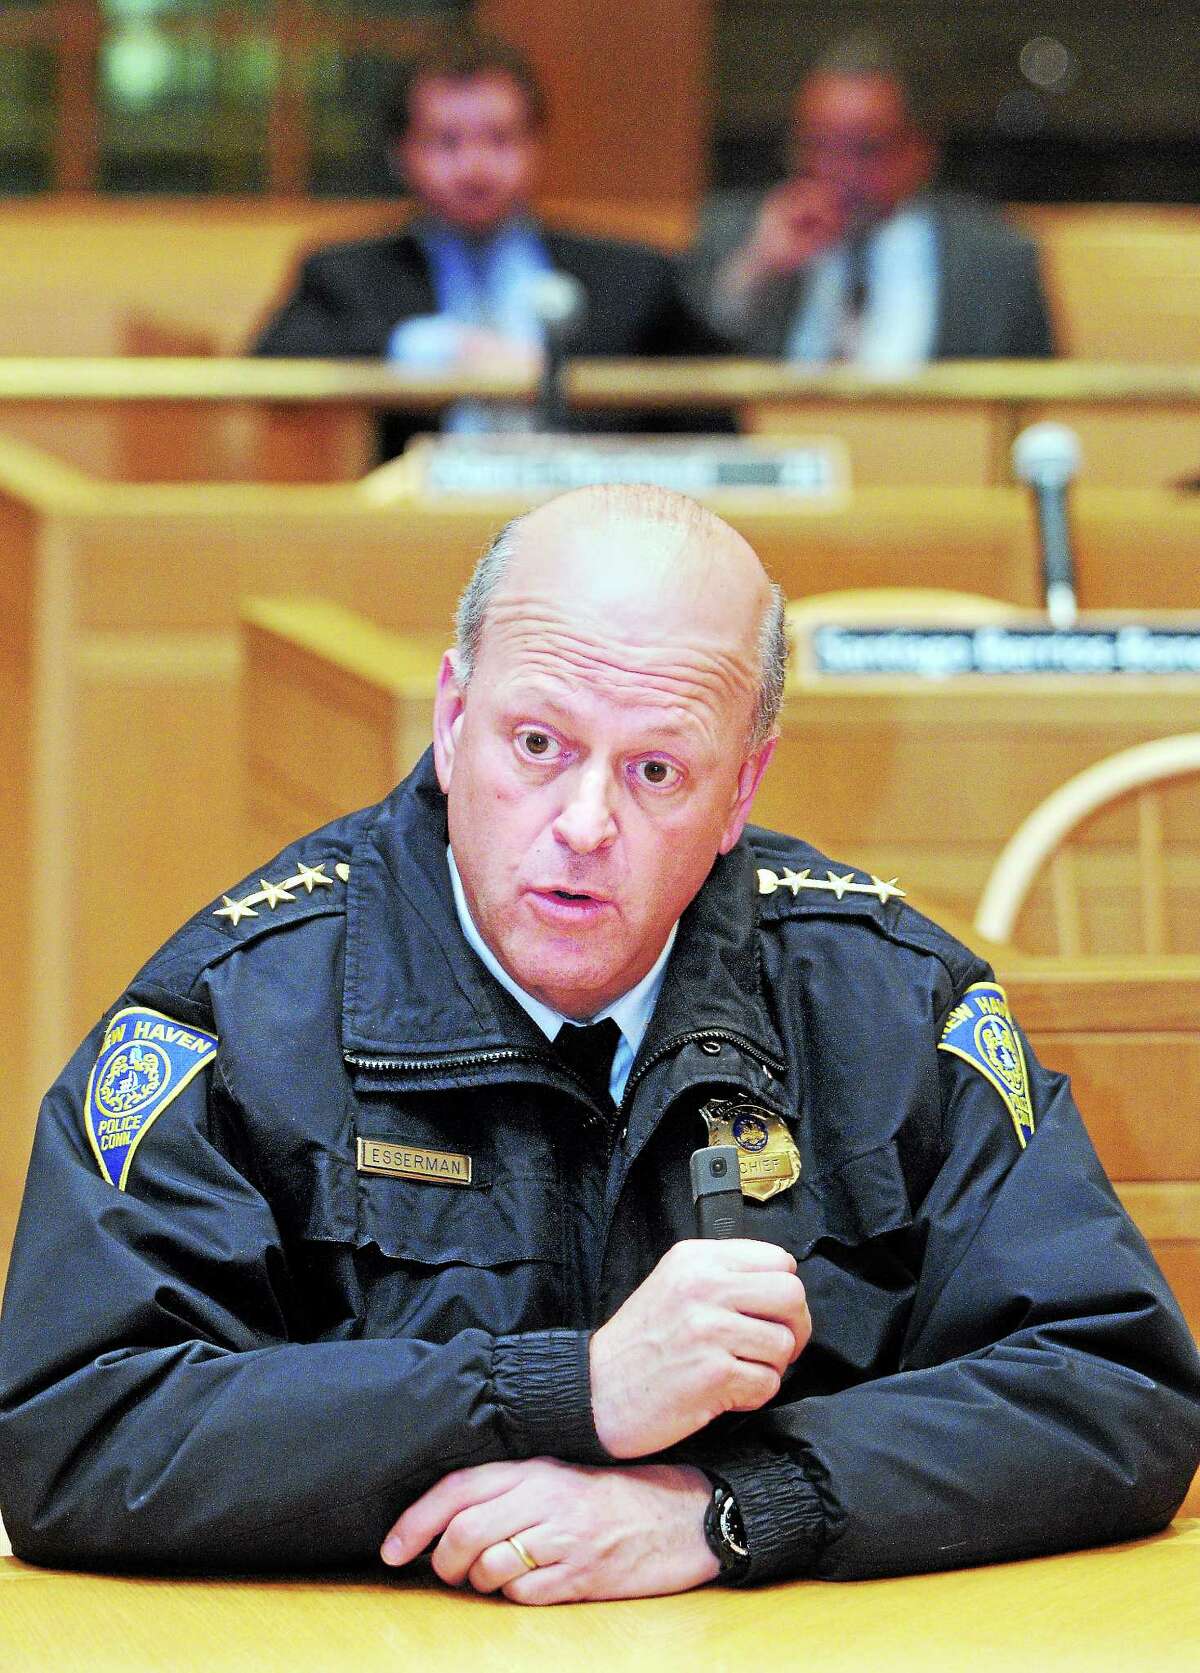 New Haven Police Chief Dean Esserman appears before the Aldermanic Affairs Committee at City Hall in New Haven Monday. Esserman explained his goals for the department in the coming years should he be reappointed chief, as the panel weighed whether to recommend extending his contract. See story, XX